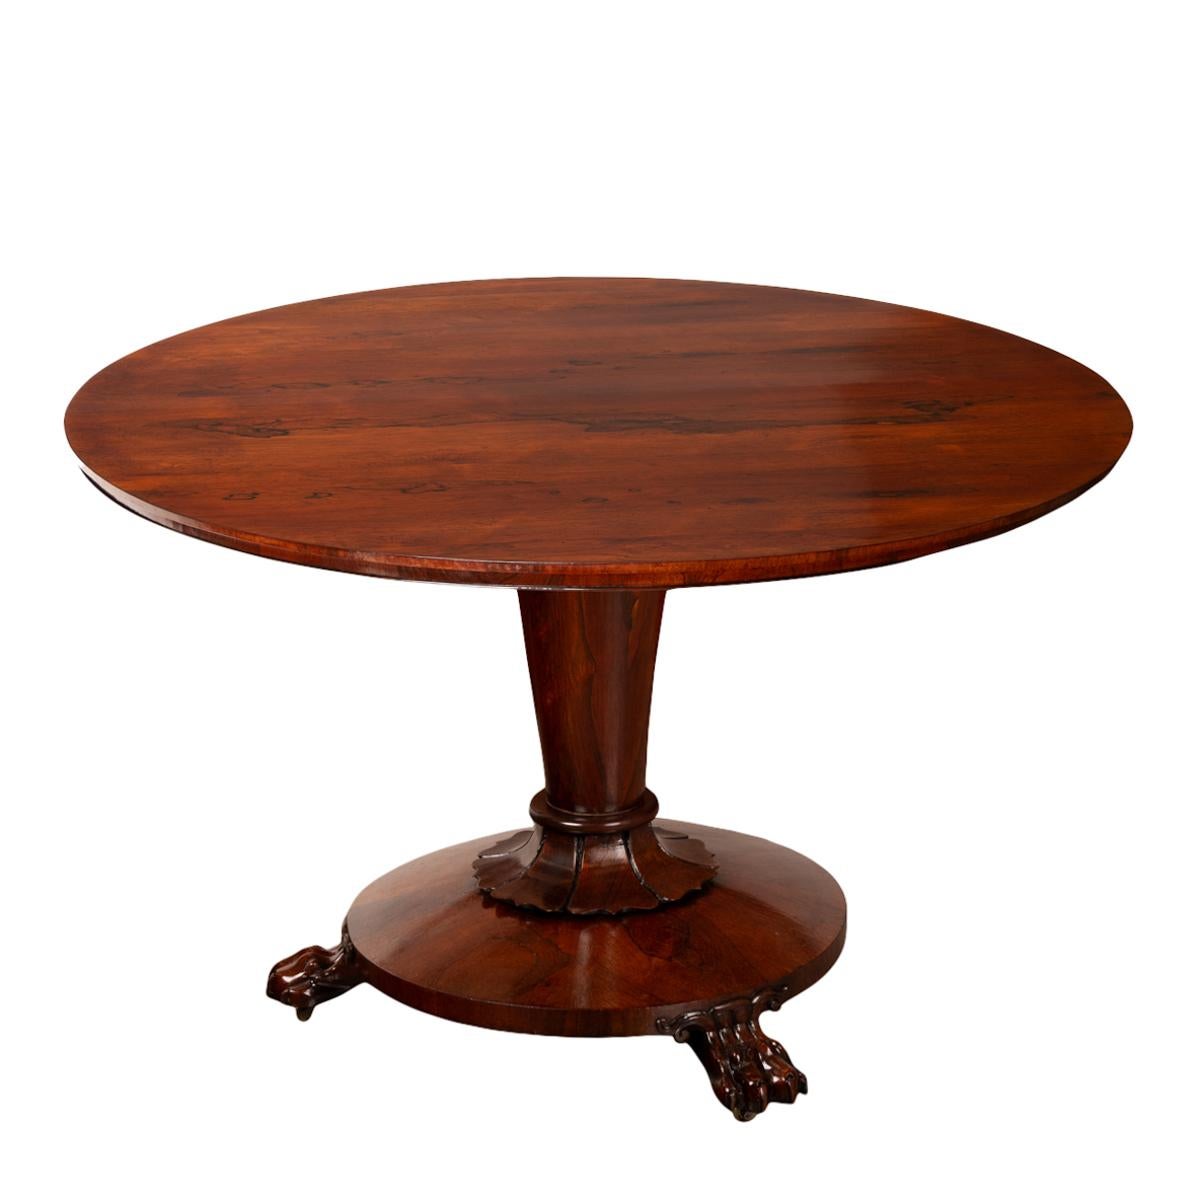 A very good example of an antique Georgian, Regency period, tilt-top rosewood dining/breakfast, circa 1820.
The table is made of the finest figured rosewood, the circular top locking into the pedestal base with the original brass locking mechanism